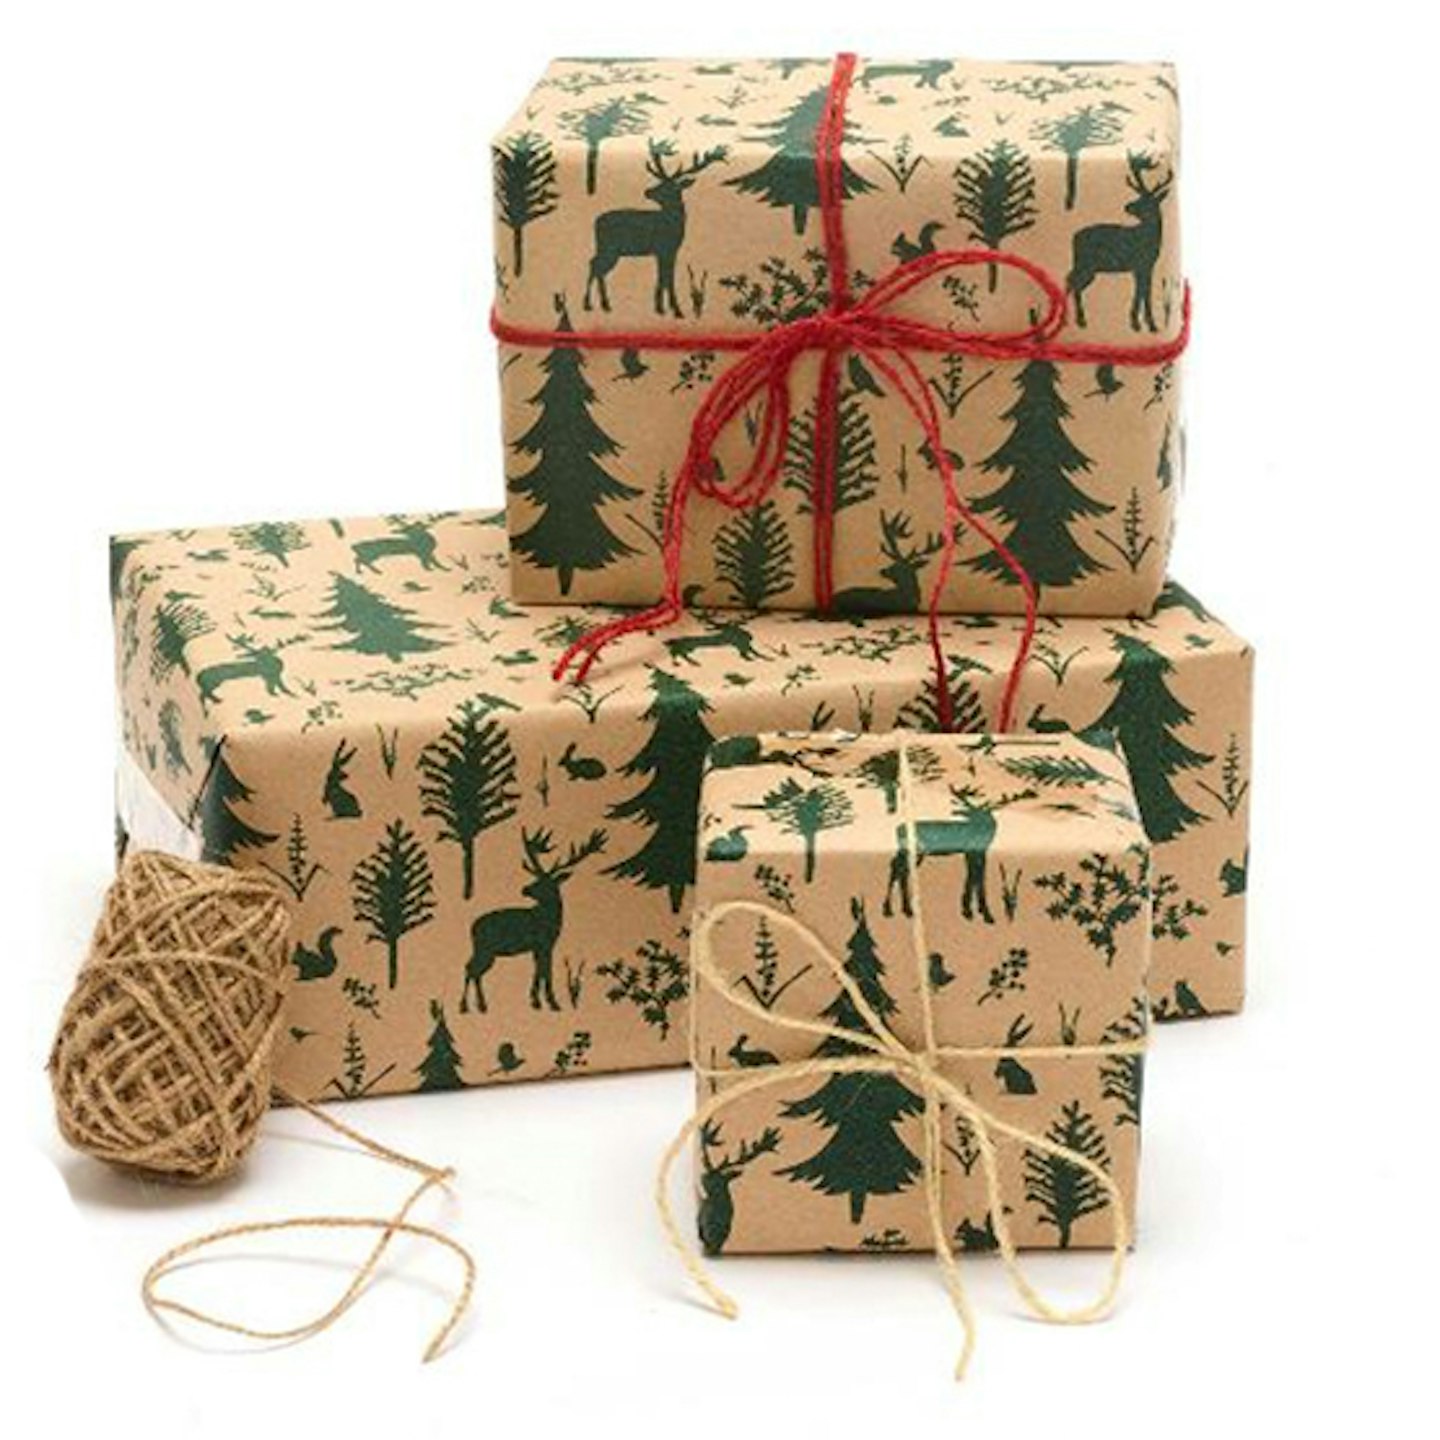 10 Eco-friendly gift wrapping ideas